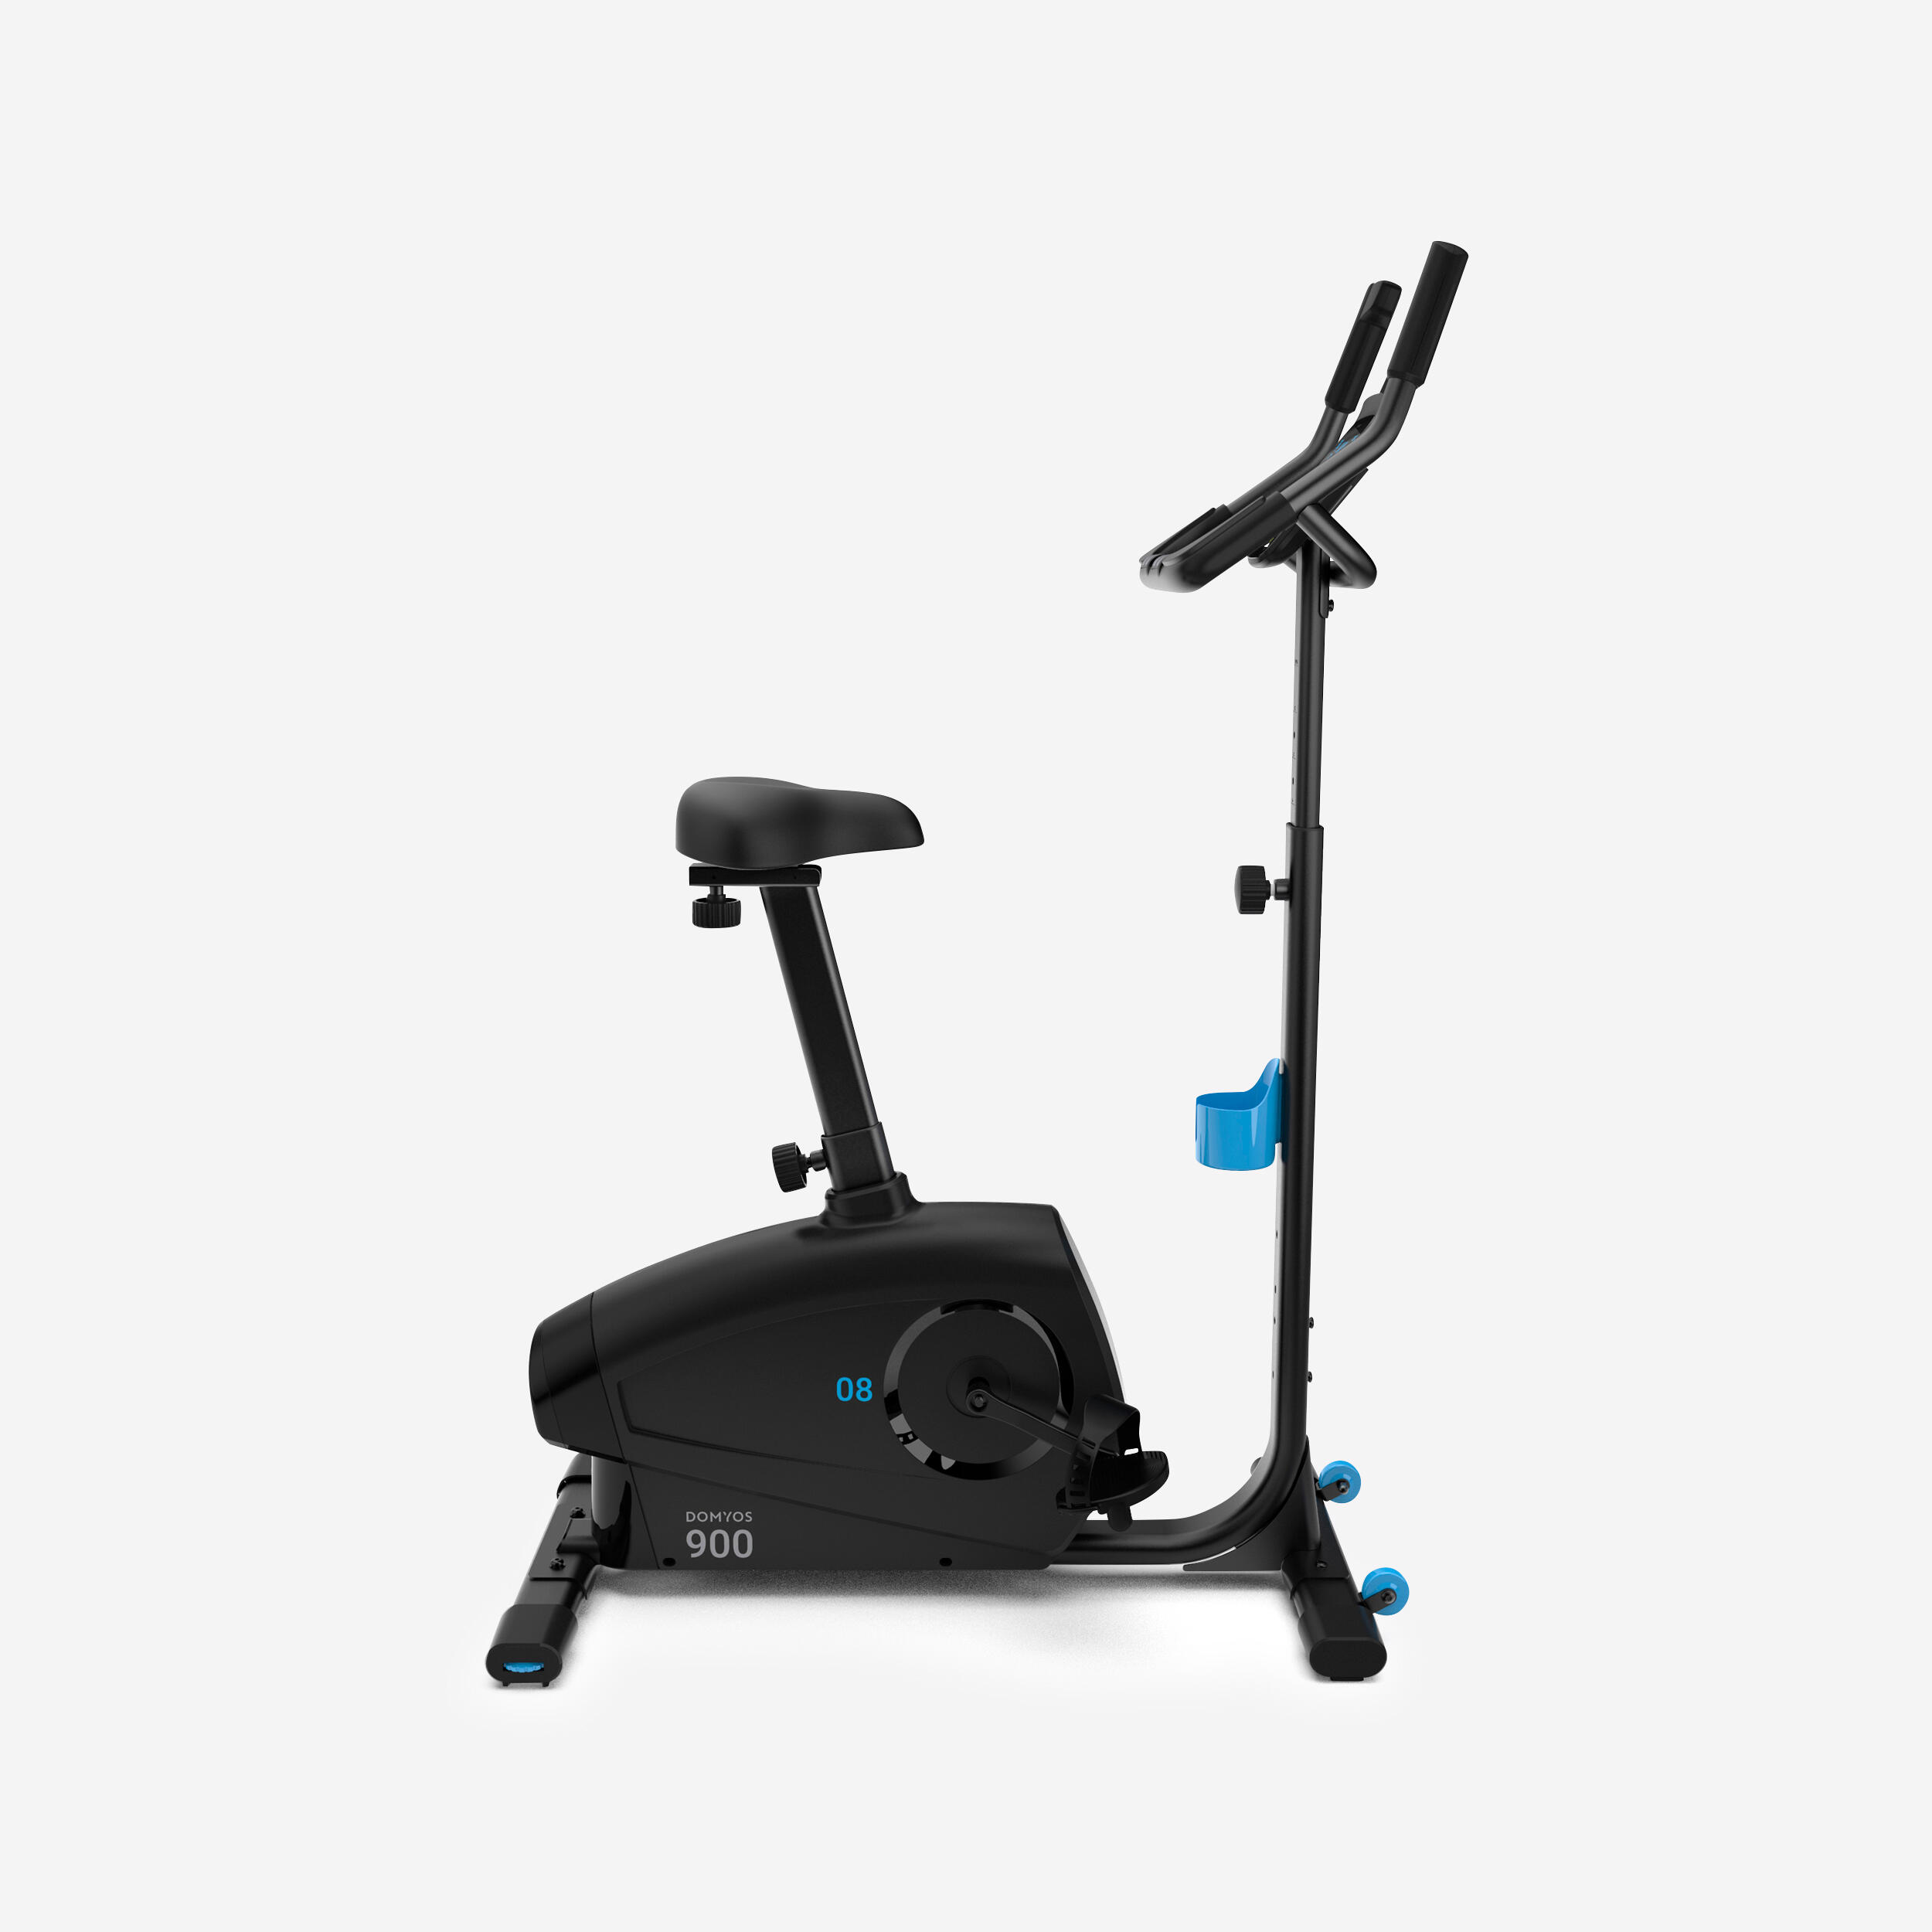 Self-Powered Exercise Bike 900 Connected to Coaching Apps 4/7